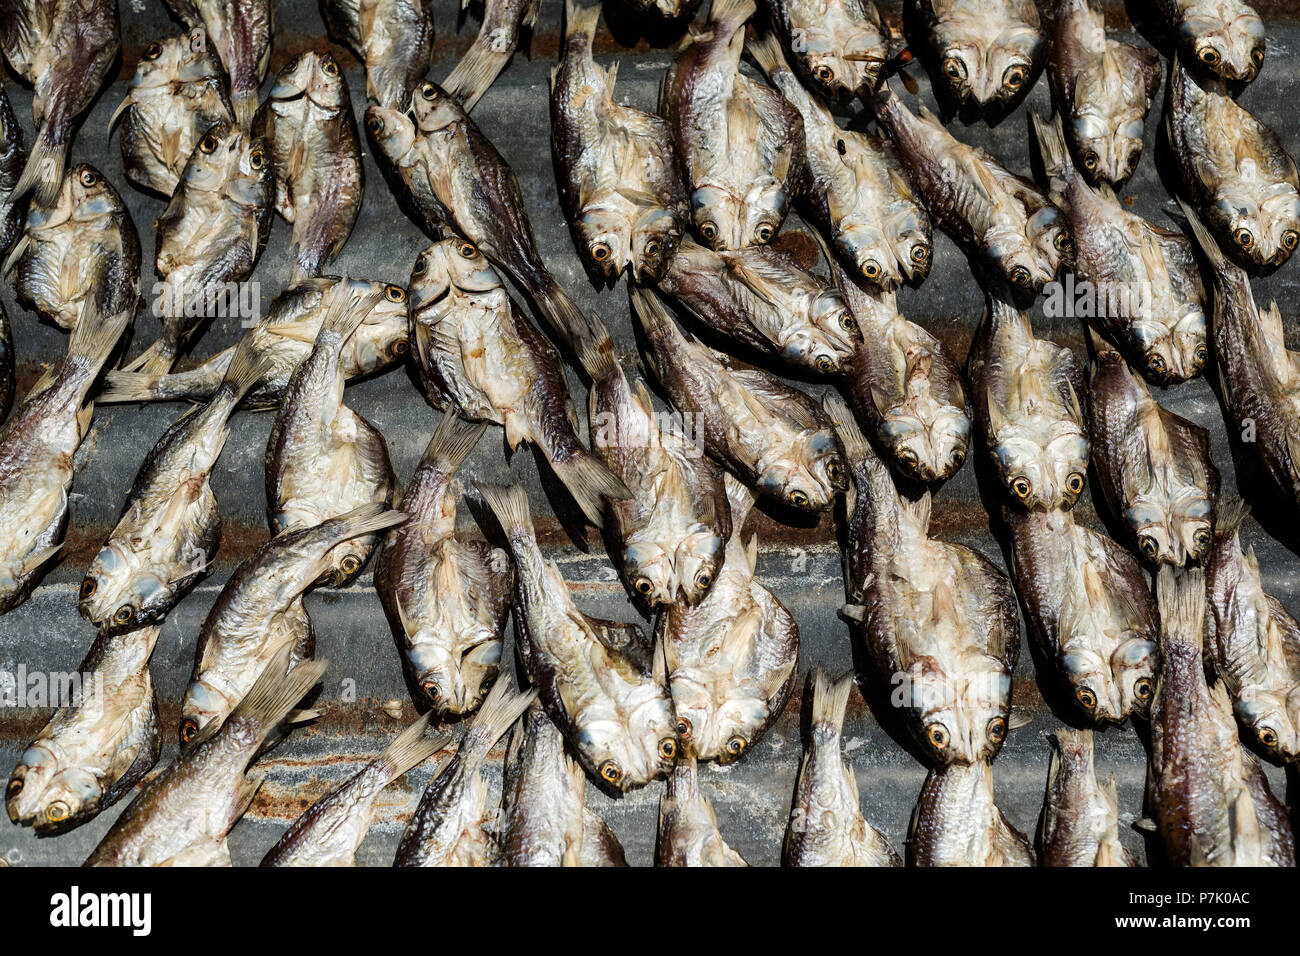 Dried fish on an asian market Stock Photo